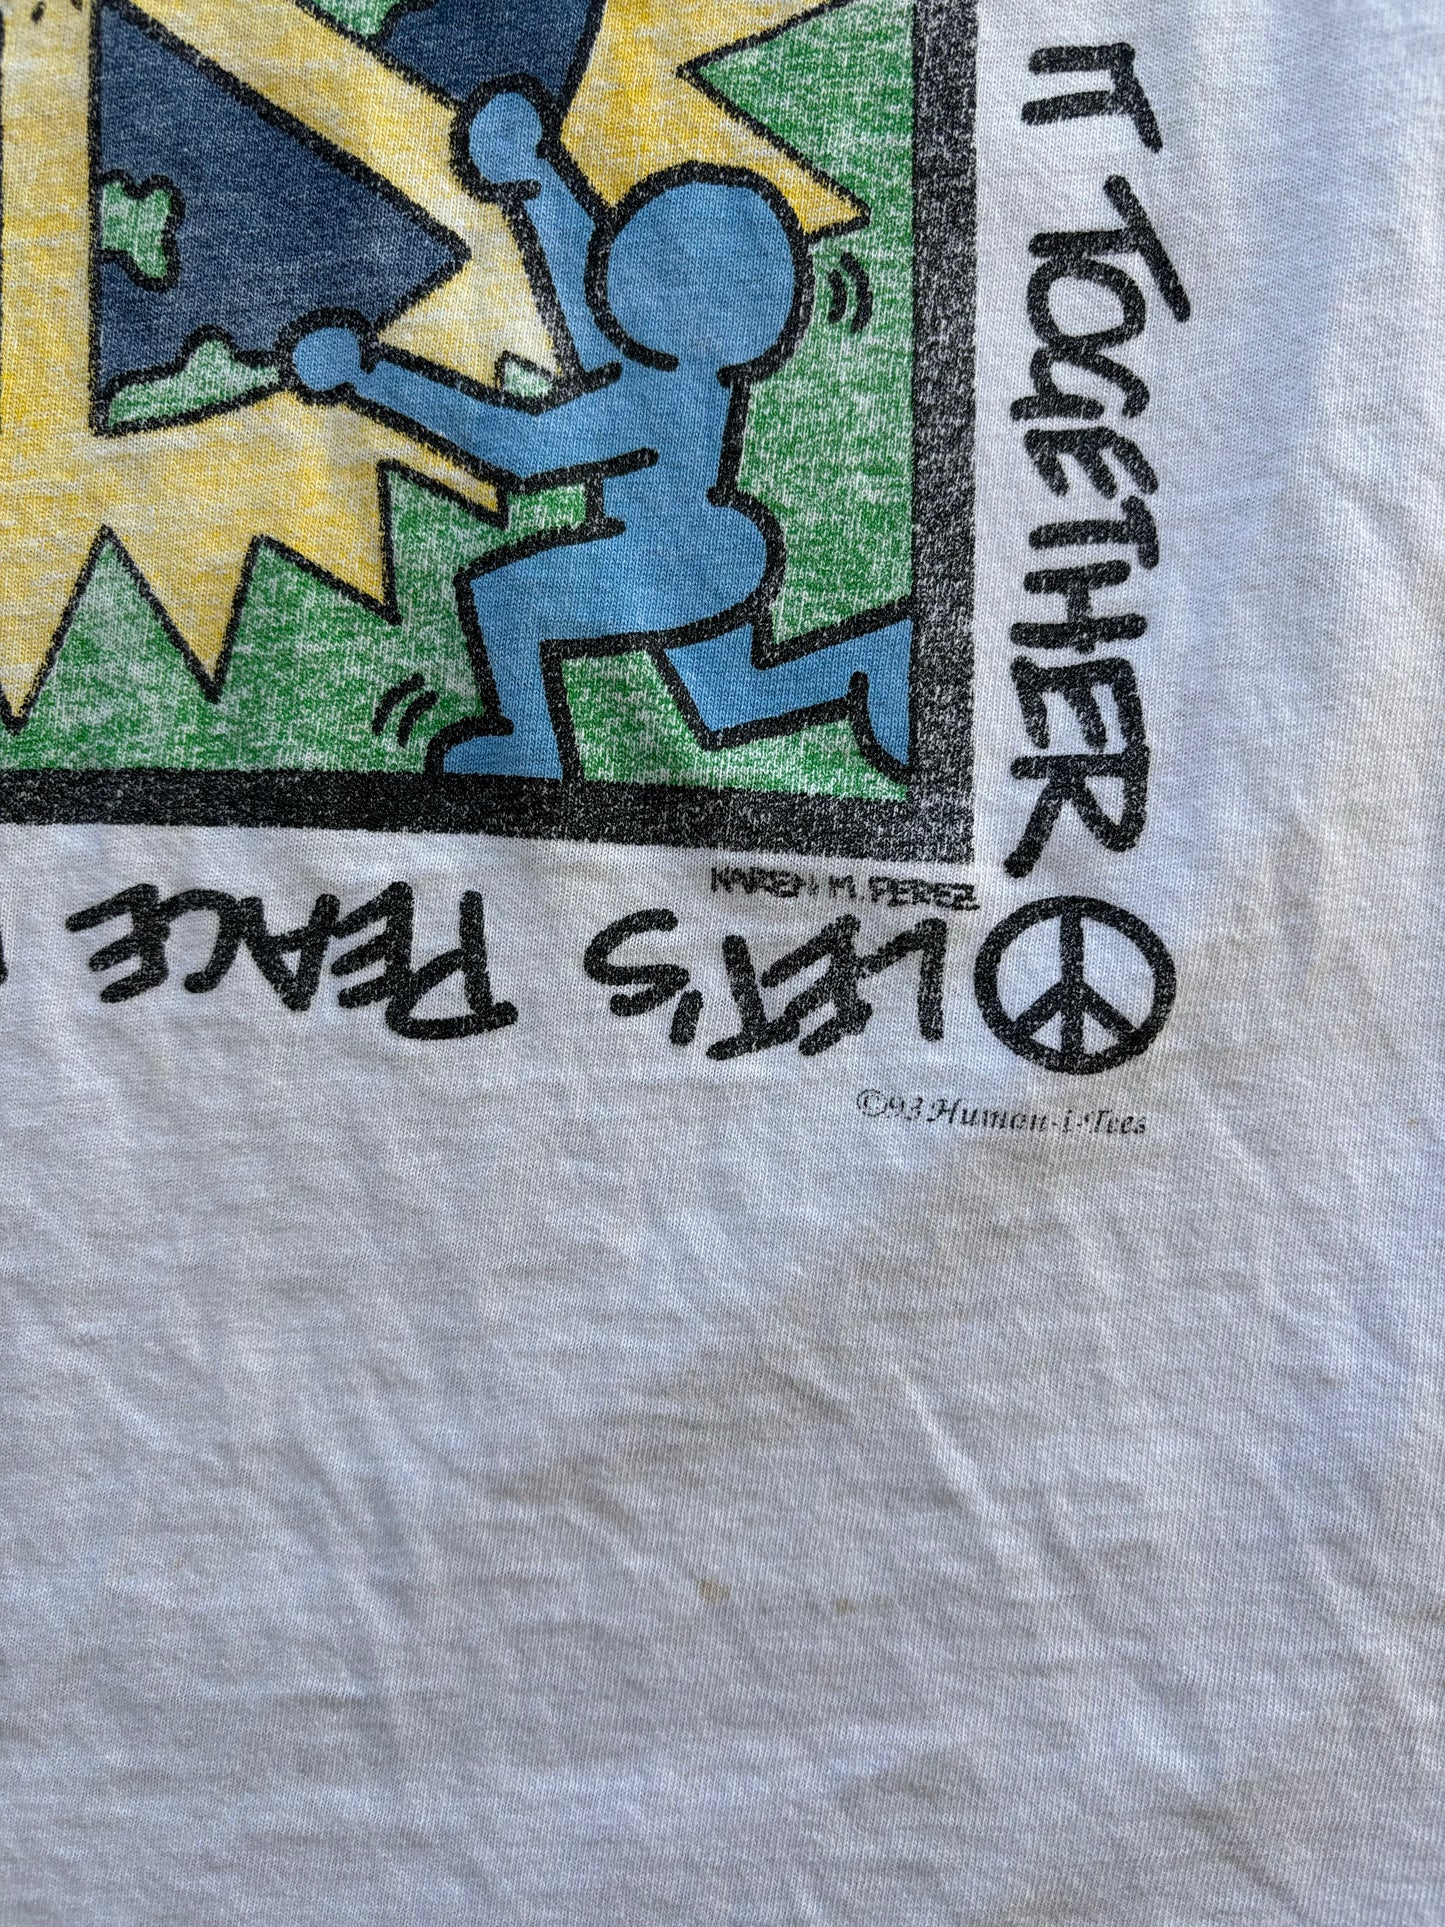 1993 Let's Piece It Together Tee Size XL